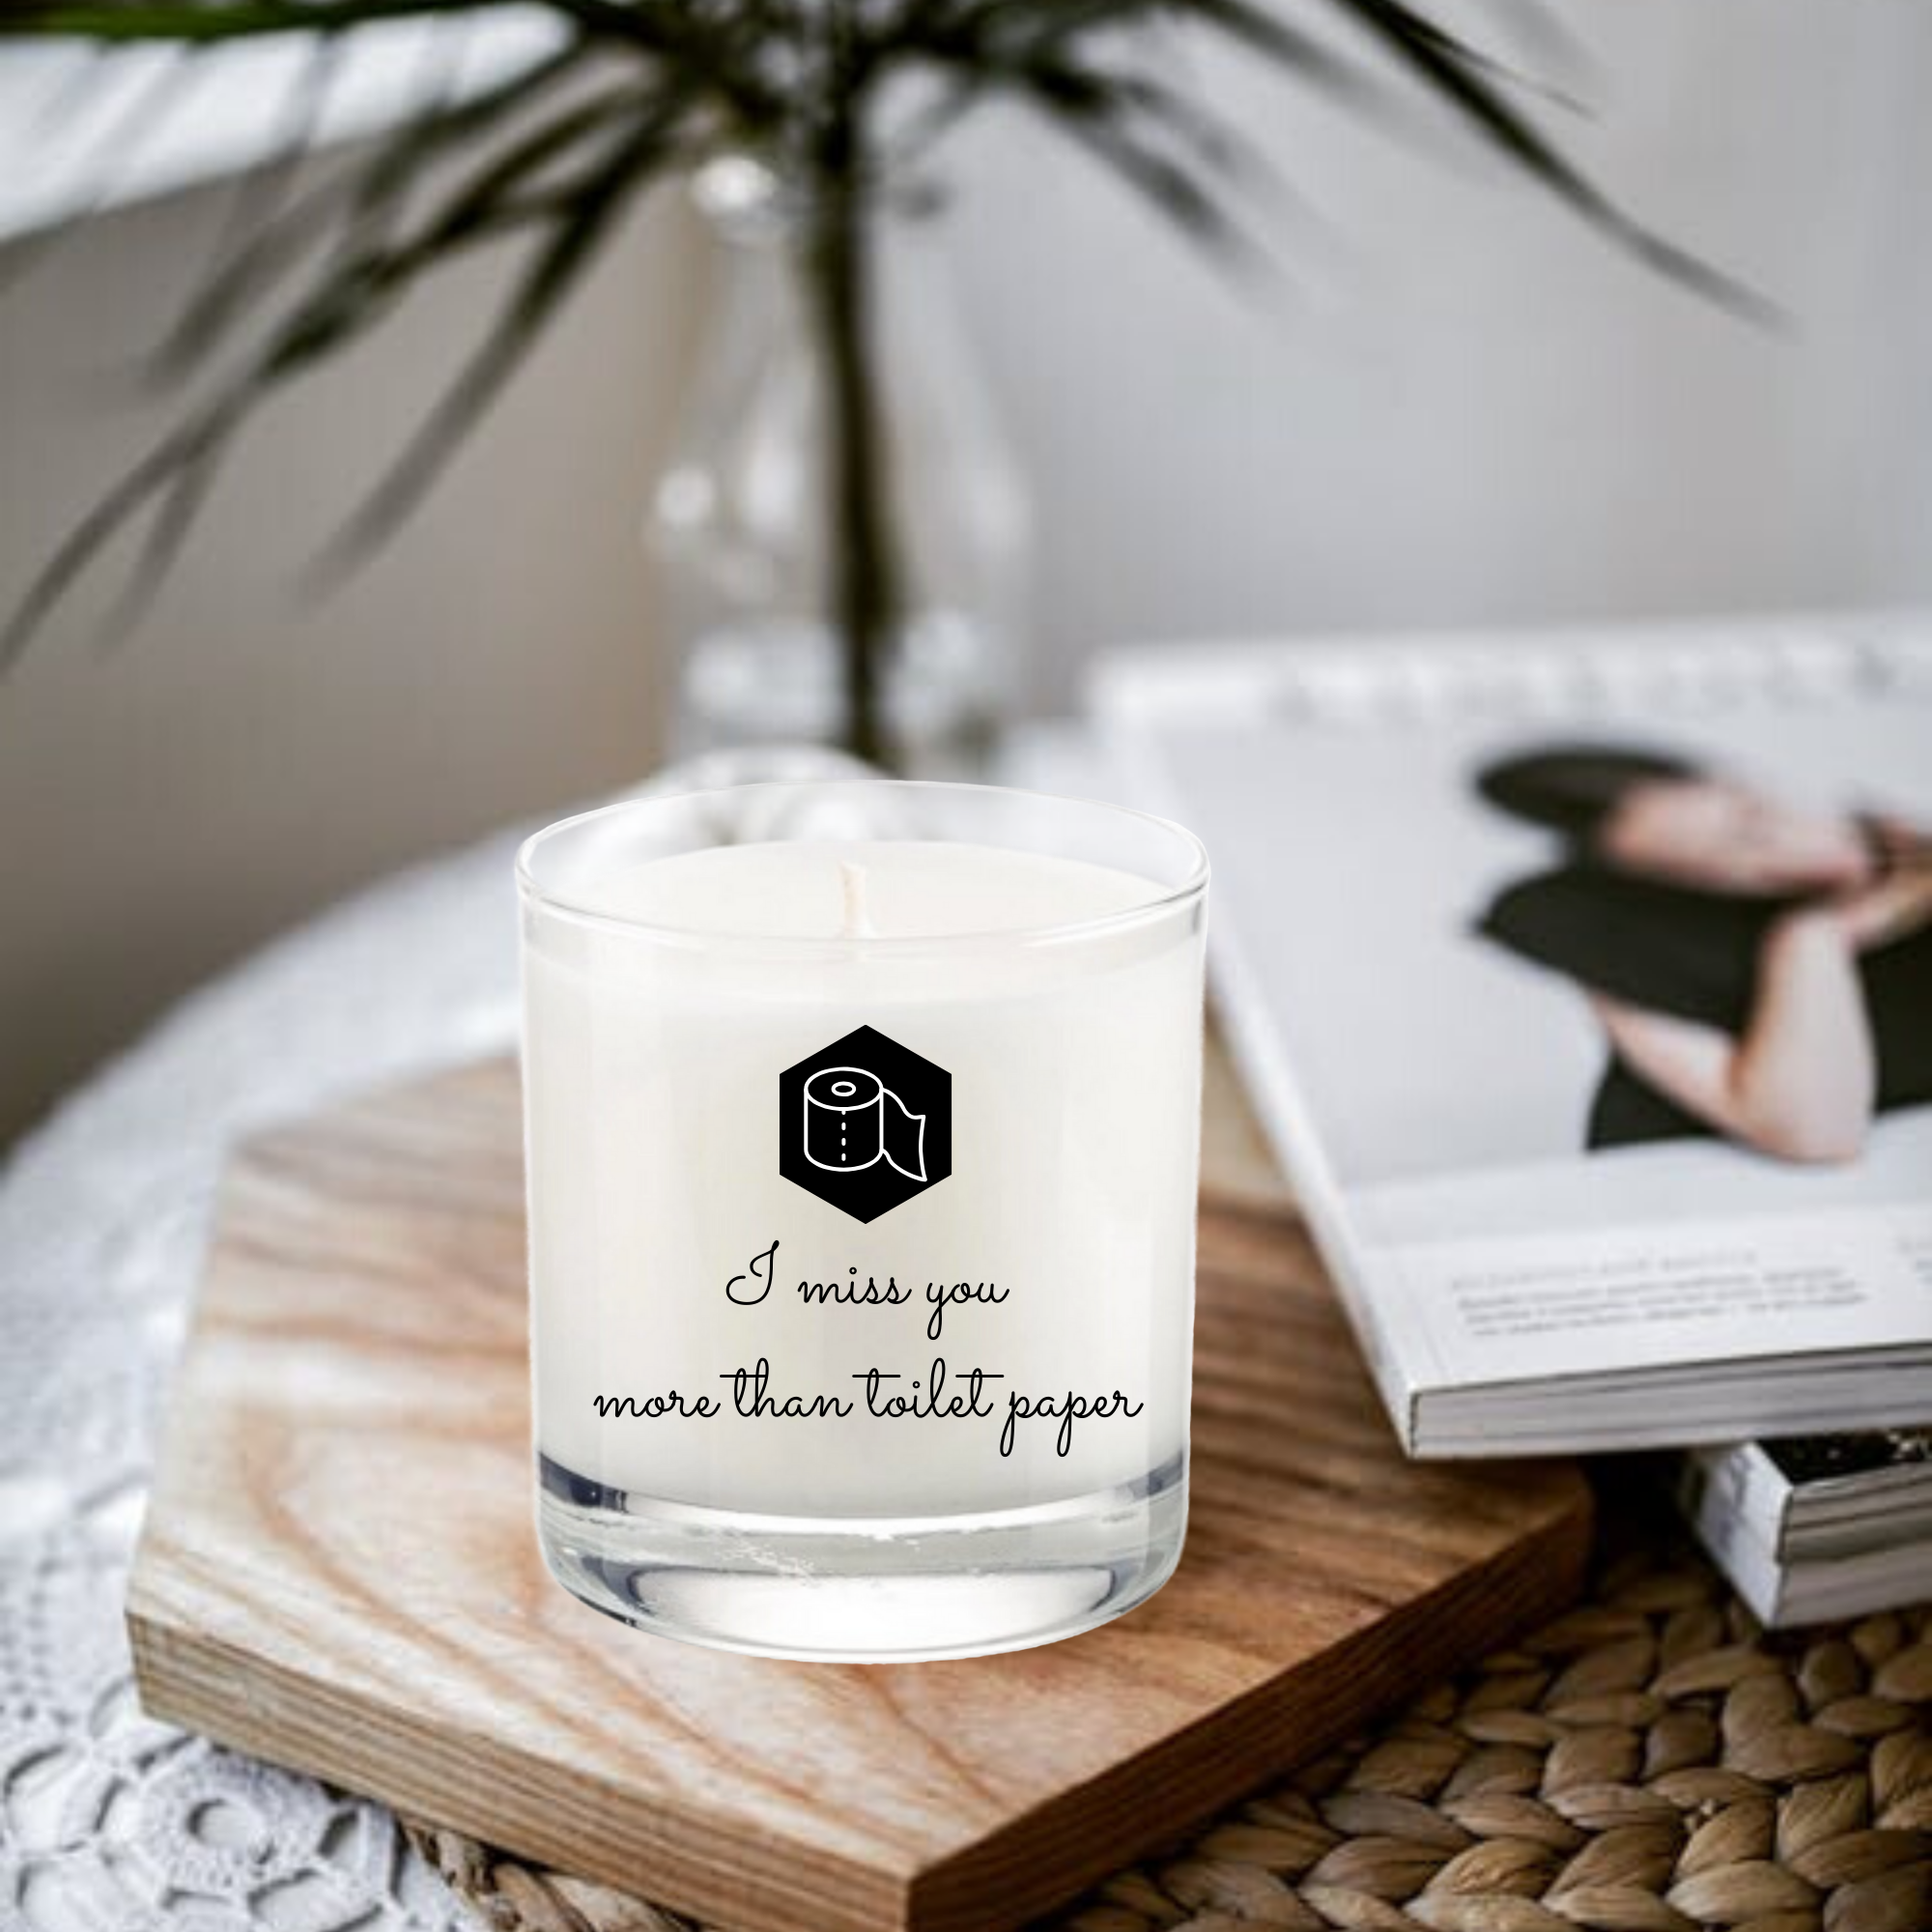 Personalized Candle Gifts | Find & Send Custom Gifts 2020 | Wicked Good Fragrances